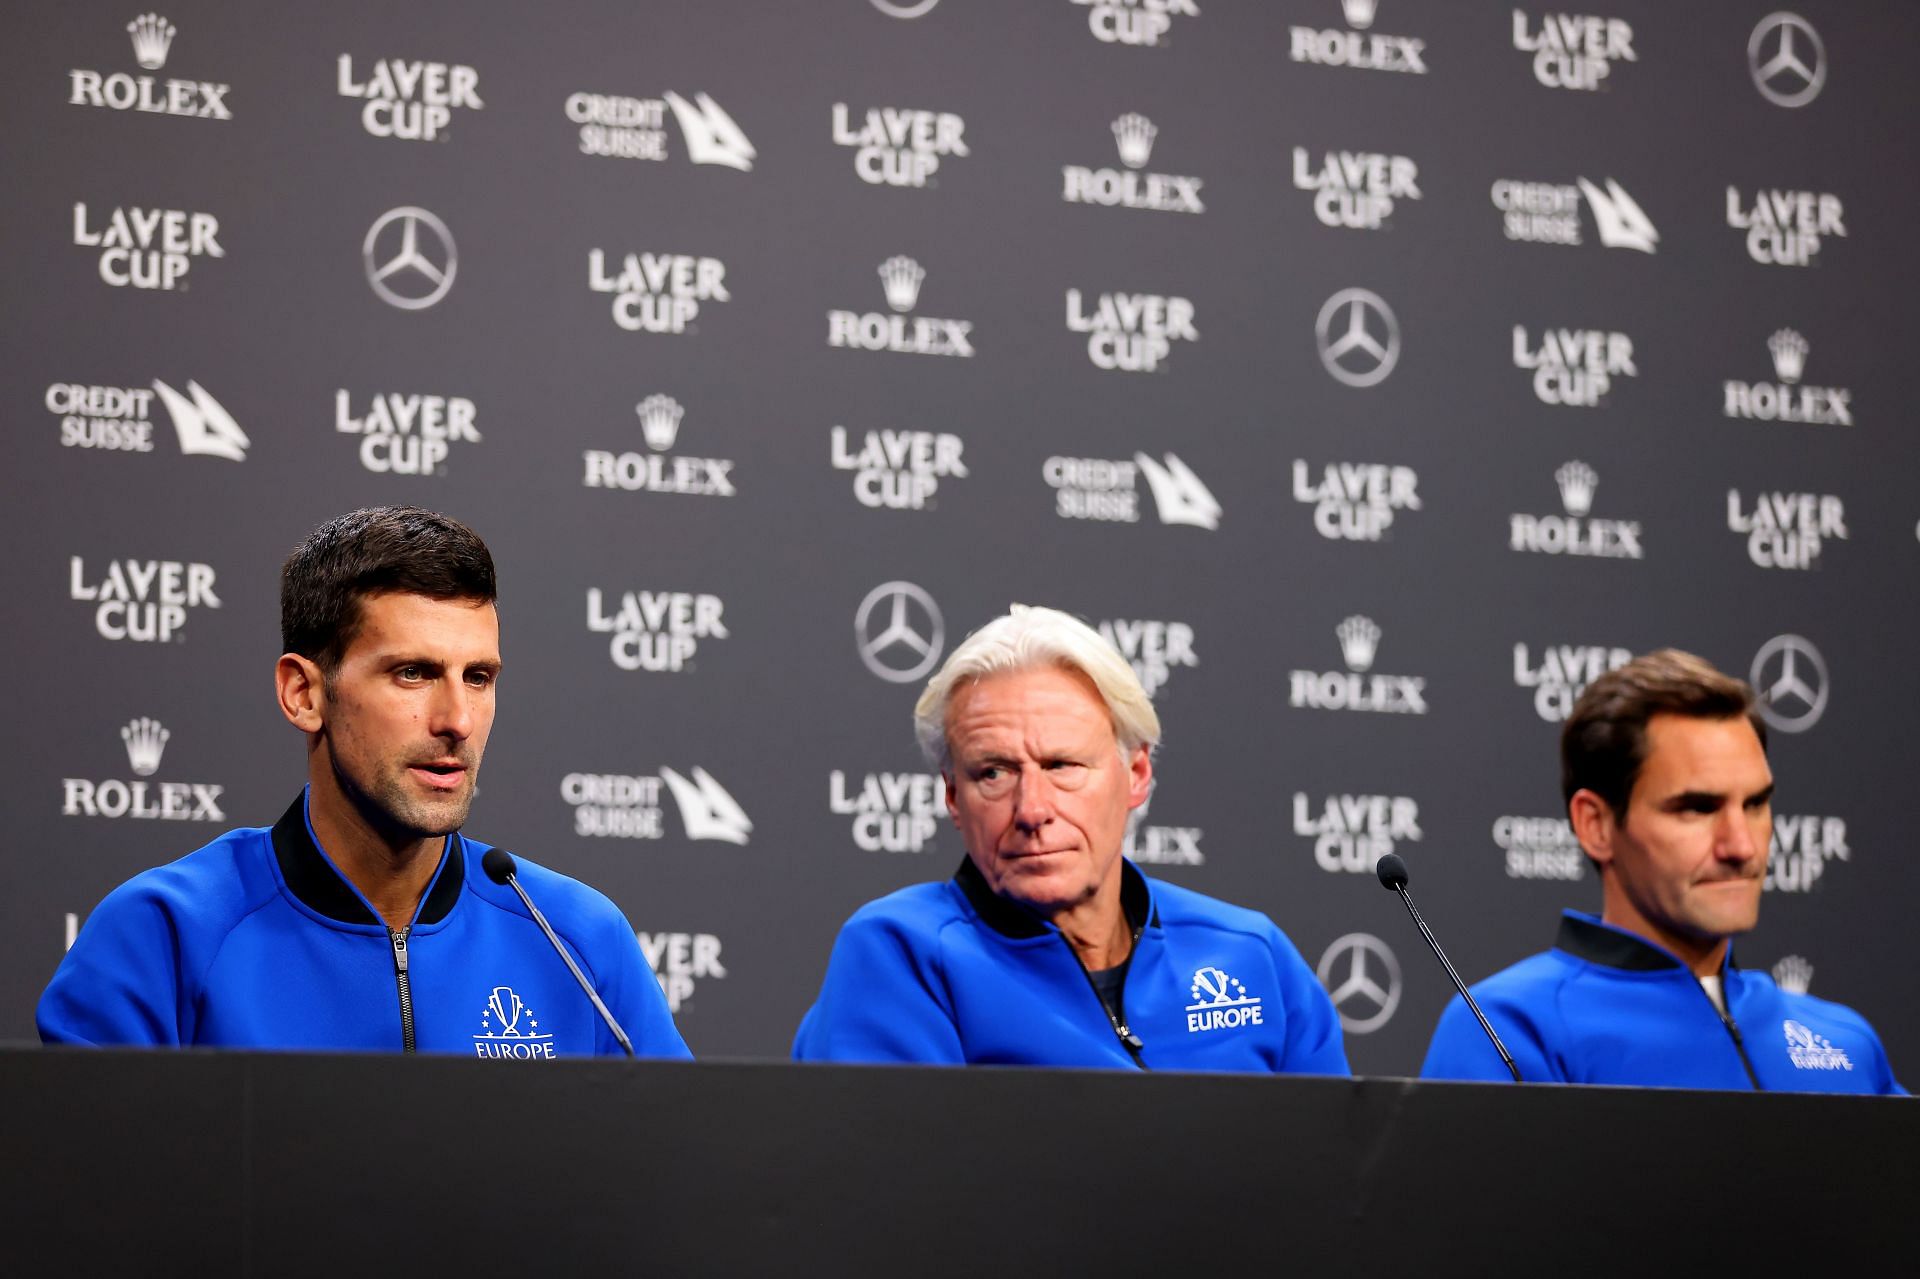 Novak Djokovic, Bjorn Borg and Roger Federer of Team Europe at the Laver Cup 2022 - Day Three